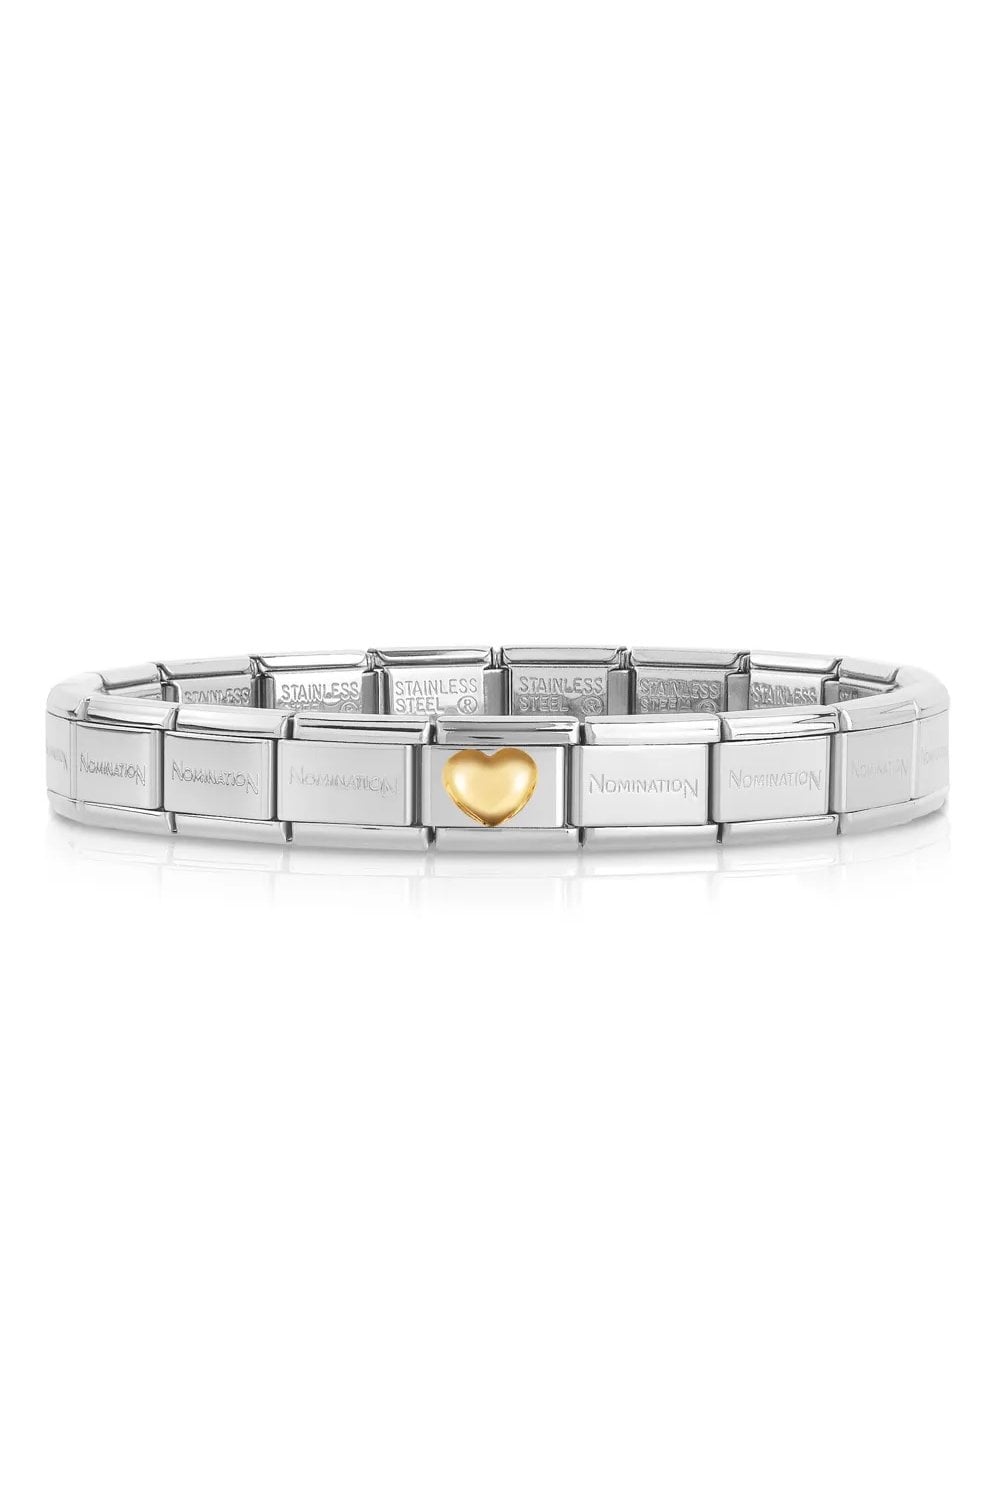 Nomination Bracelet With Heart Charm